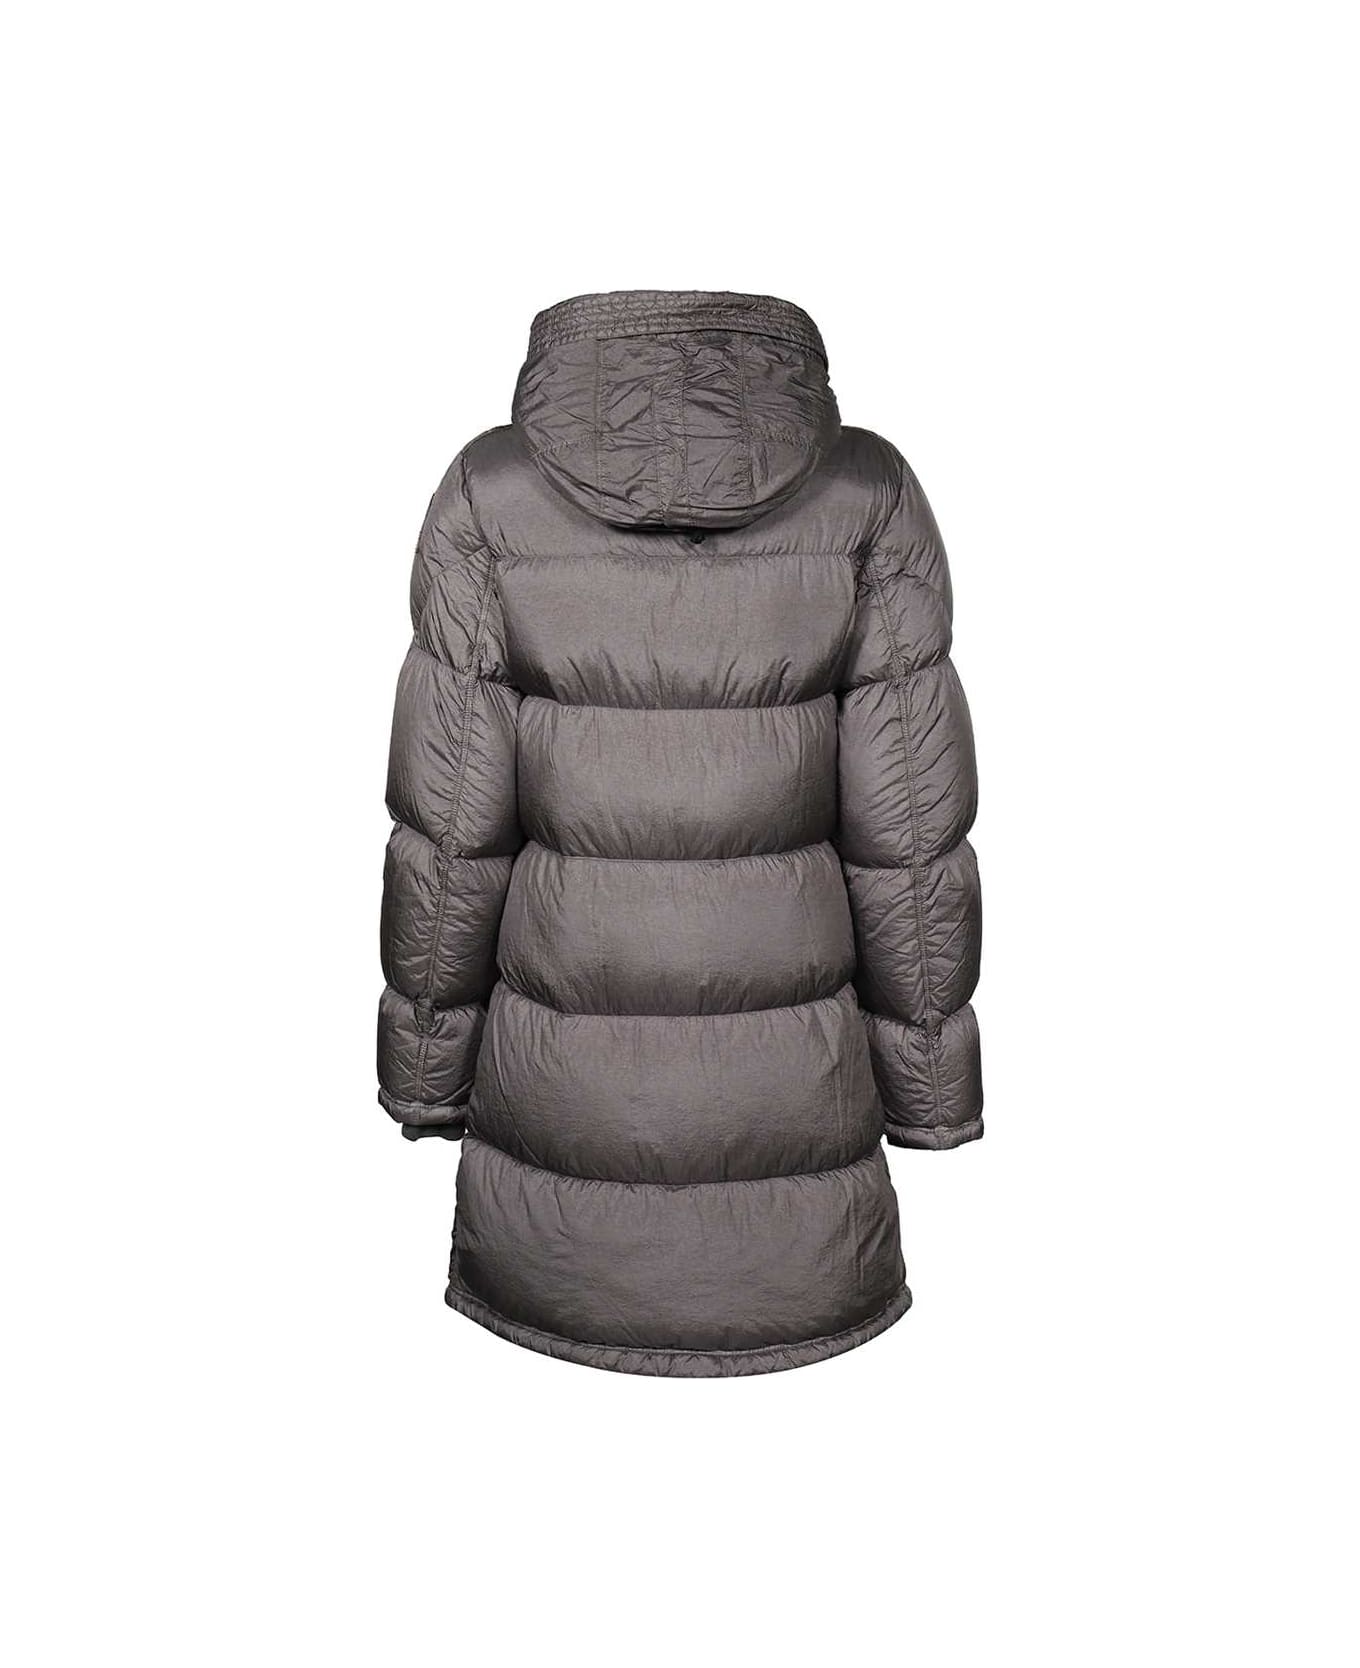 Parajumpers Angelica Long Hooded Down Jacket - grey コート